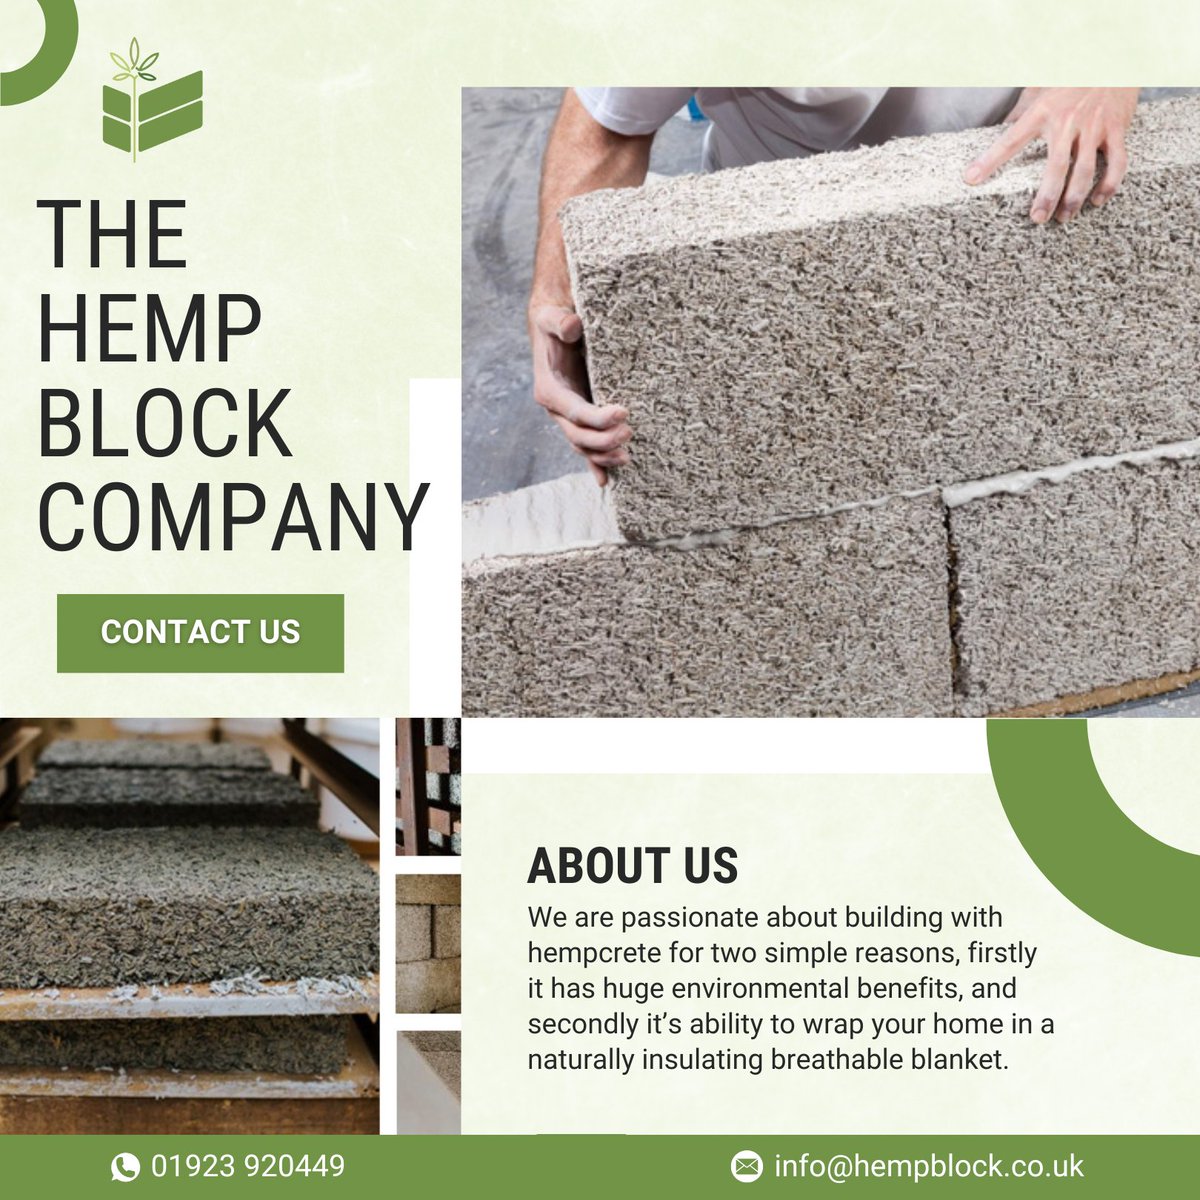 🌿Meet The Hemp Block Company! We build with #hempcrete for a greener planet and cosy, energy-efficient homes. Discover more about us. Link in Bio!🌎🏠 #hempblocks #SustainableBuilding #EcoFriendly #GreenHomes #Insulation #EnergyEfficiency